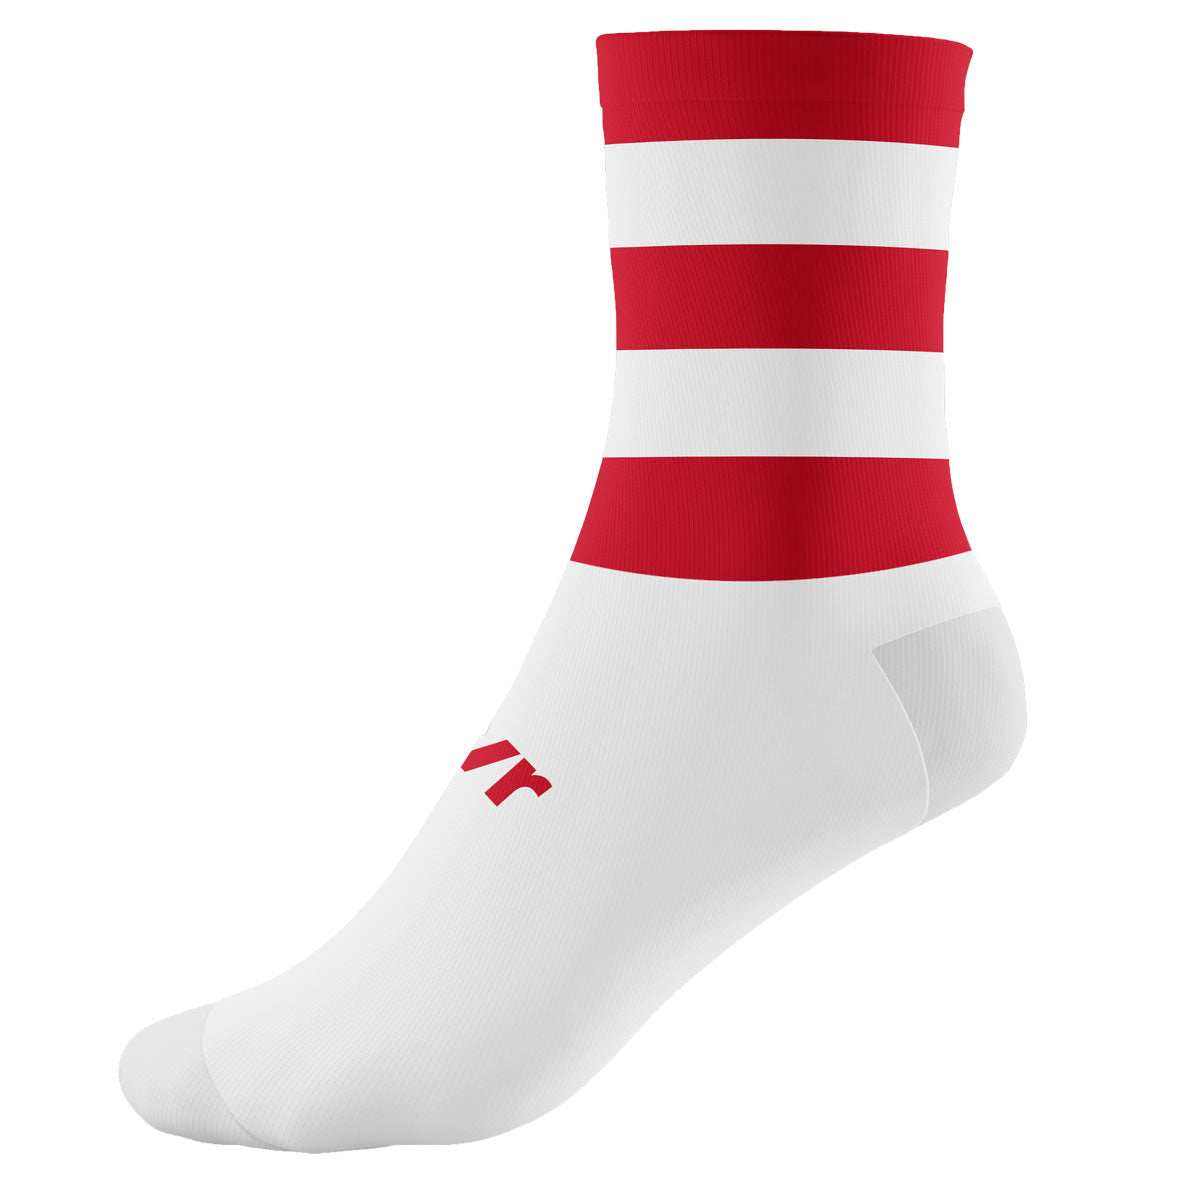 Mc Keever Pro Mid Hooped Socks - Adult - White/Red/White